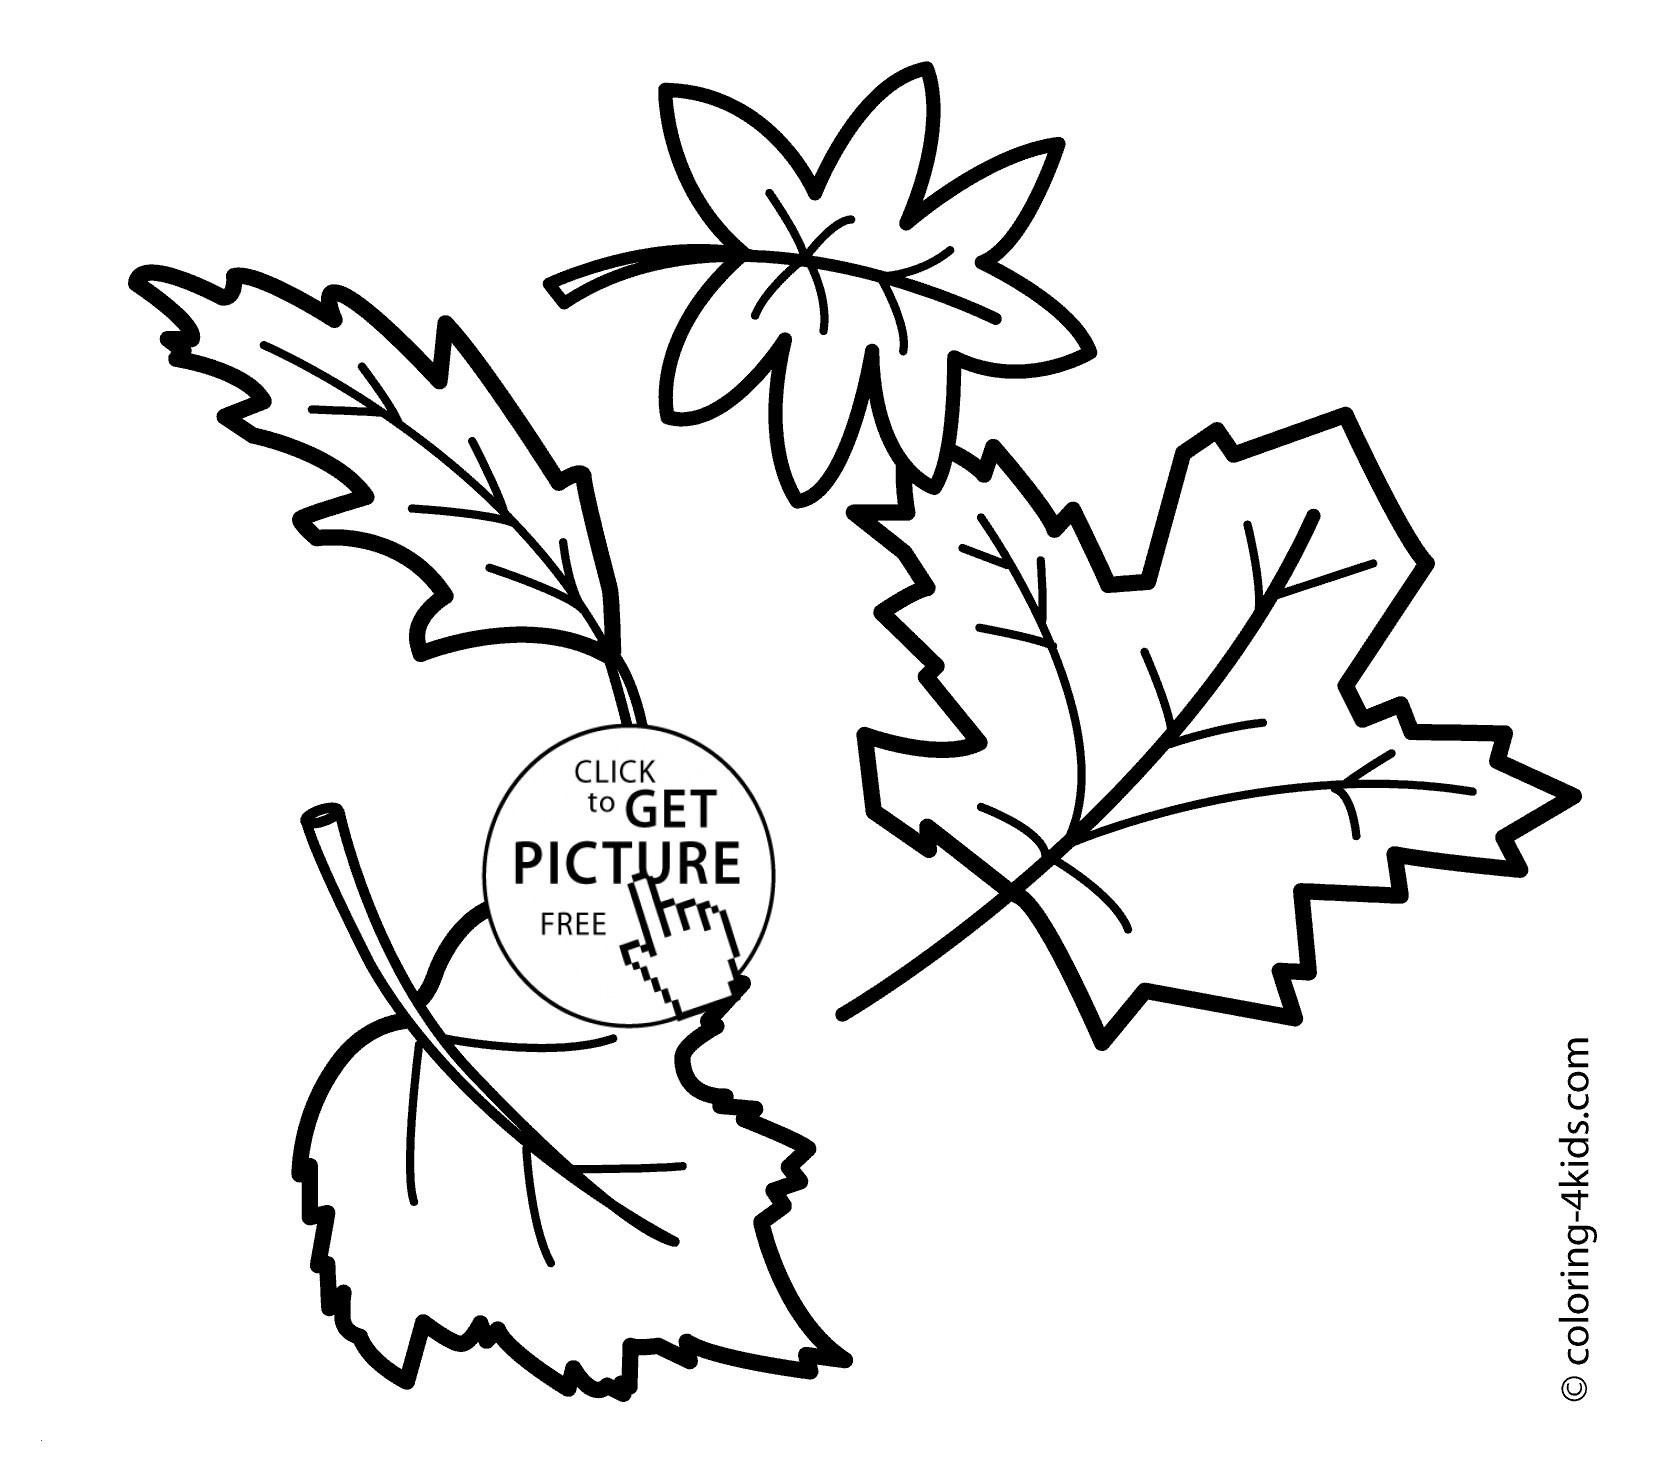 Printable Colored Autumn Leaves | Download Them Or Print - Free Printable Fall Leaves Coloring Pages